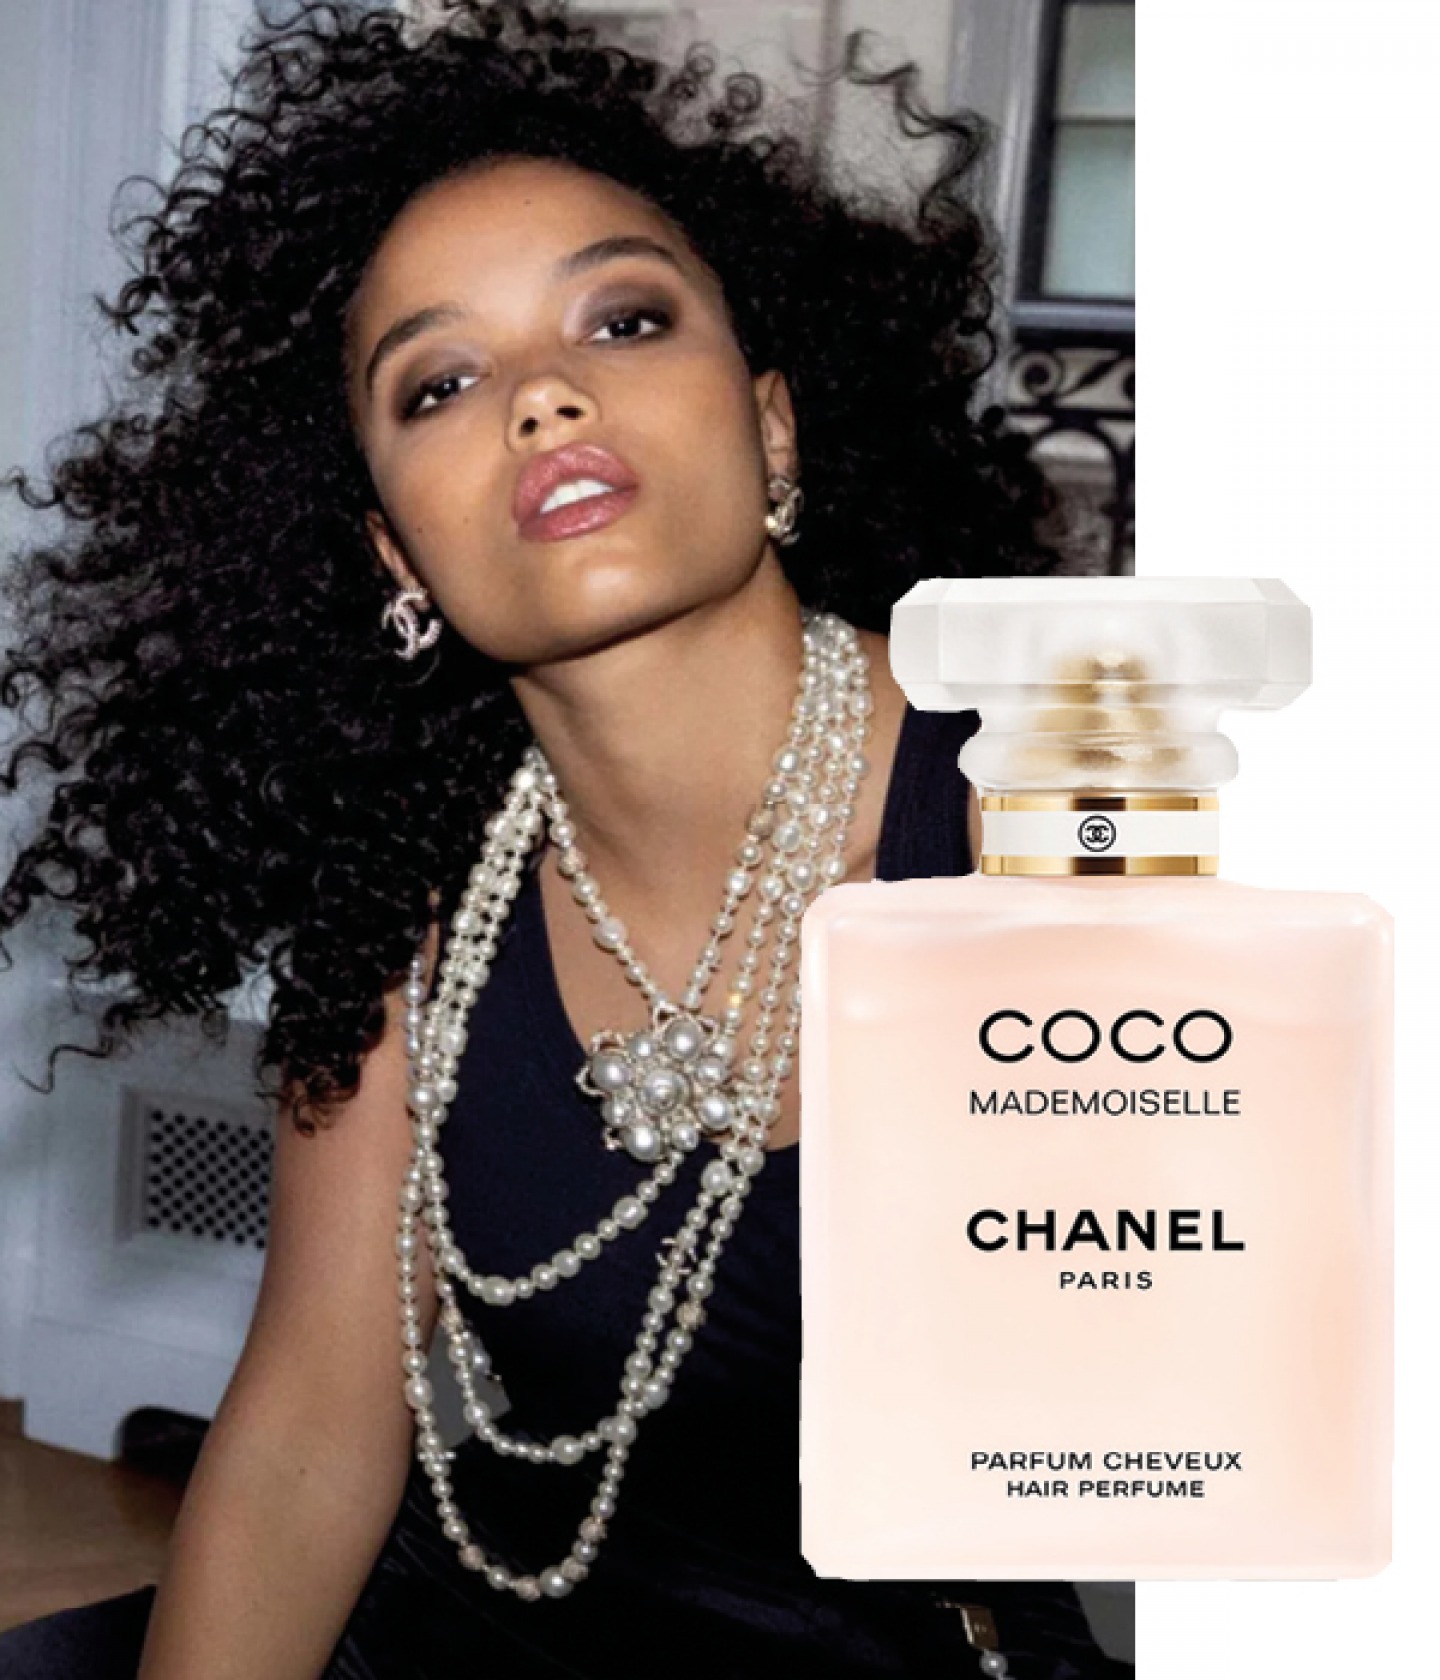 Meet Whitney Peak, the New Face of Chanel's Coco Mademoiselle